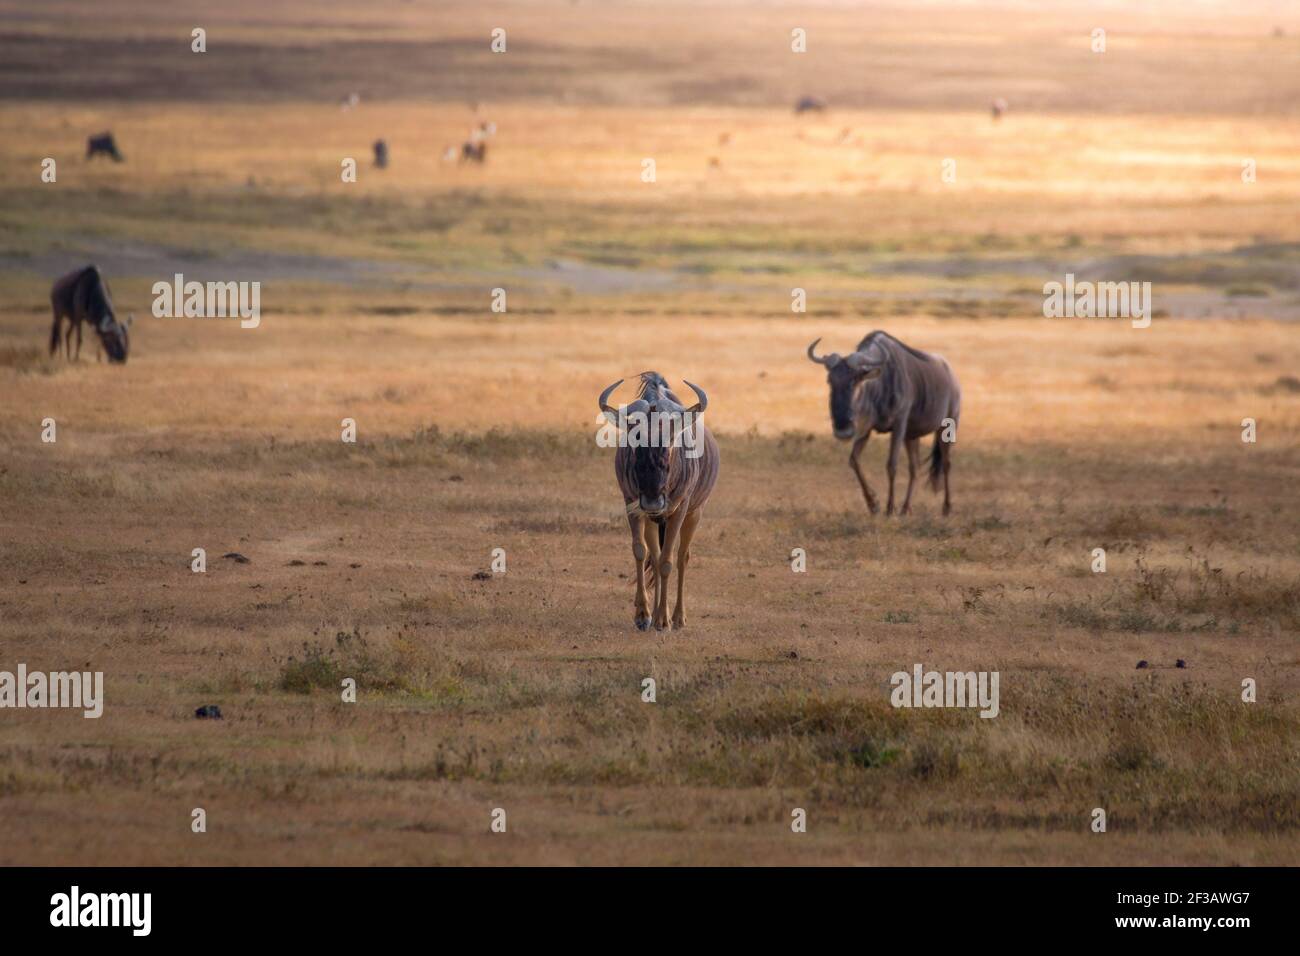 Wildebeest in the grassland of the Ngorongoro Crater Conservation Area. Safari concept. Tanzania. Africa Stock Photo